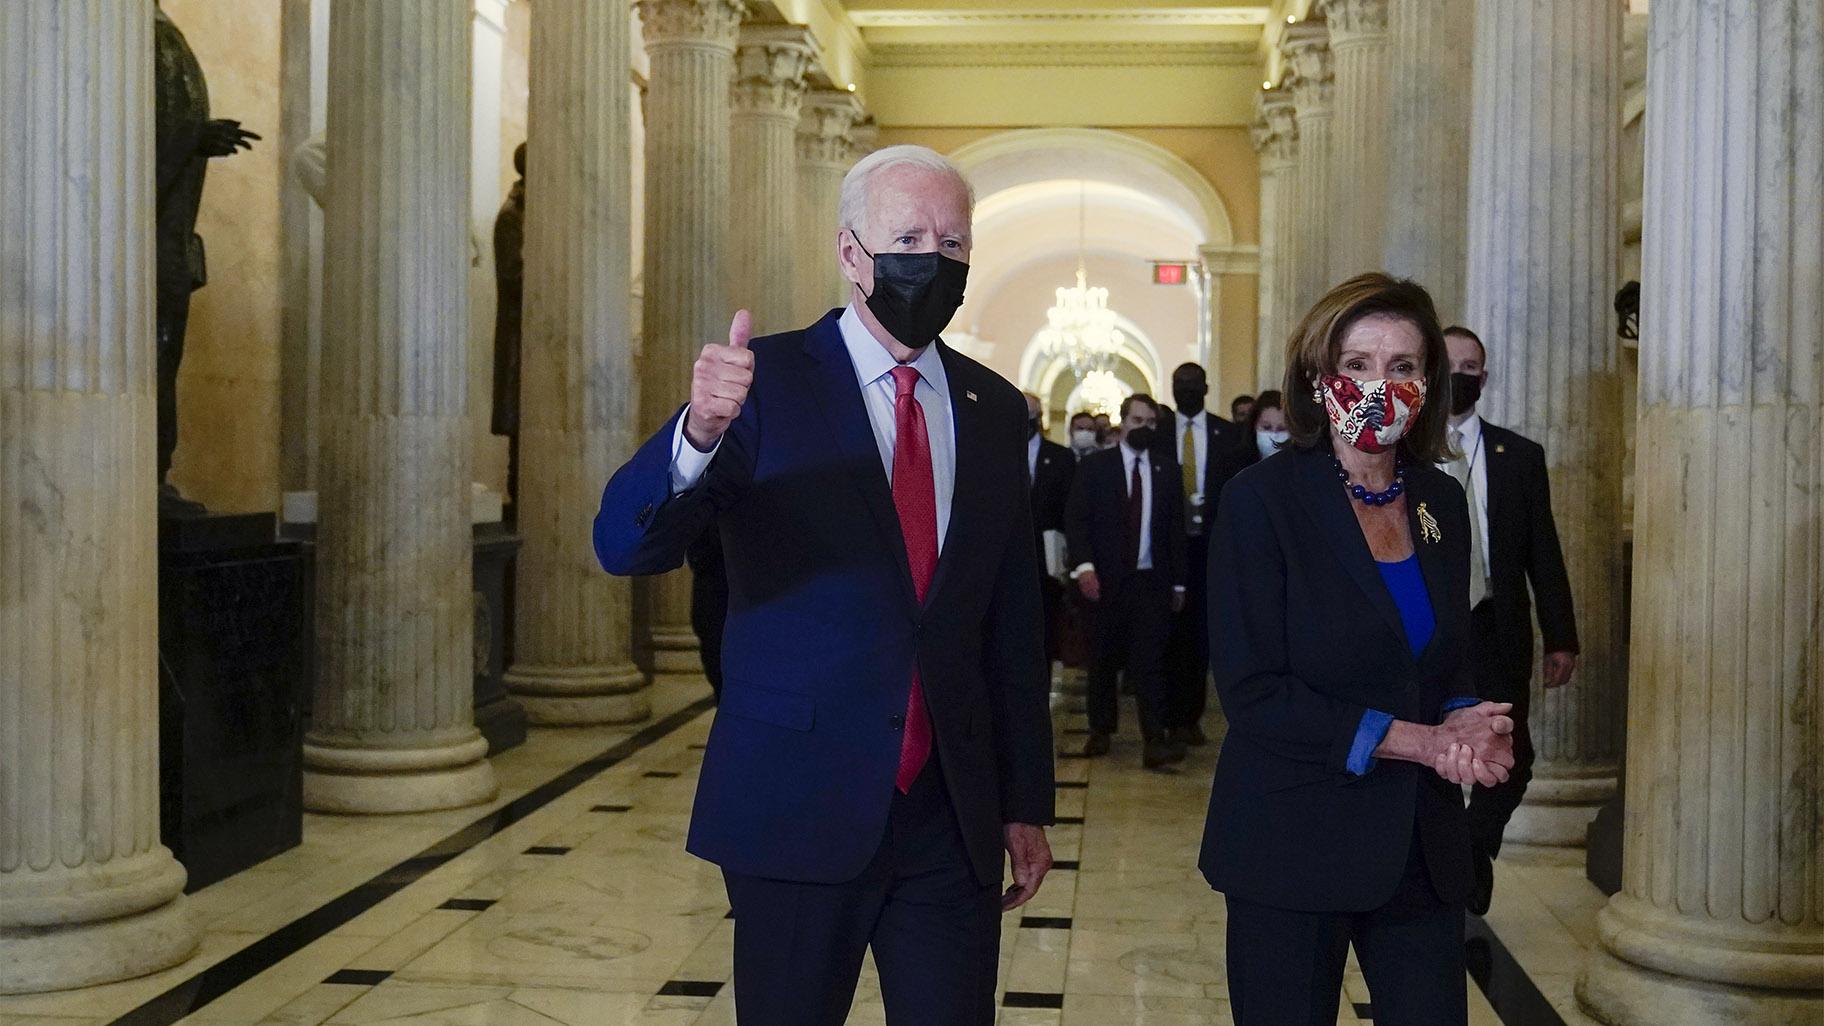 President Joe Biden gives a thumbs up as he walks with House Speaker Nancy Pelosi of Calif., on Capitol Hill in Washington, Friday, Oct. 1, 2021, after attending a meeting with the House Democratic caucus to try to resolve an impasse around the bipartisan infrastructure bill. (AP Photo / Susan Walsh)